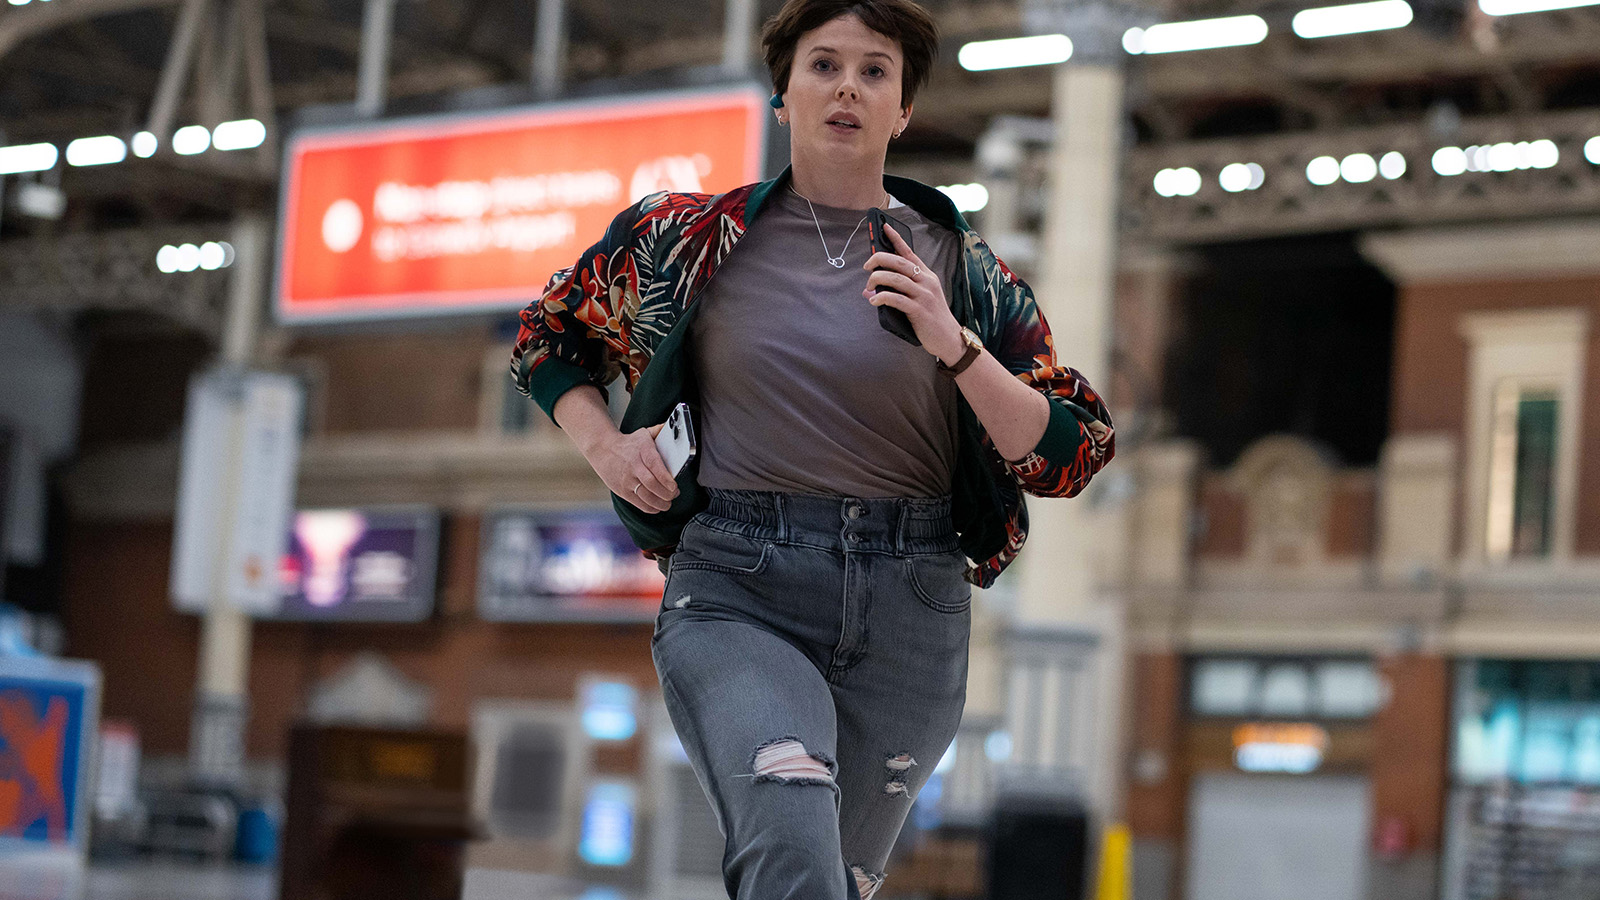 Alexandra Roach as Abby Aysgarth. She is holding two mobile phones and runs through a train station looking panicked.